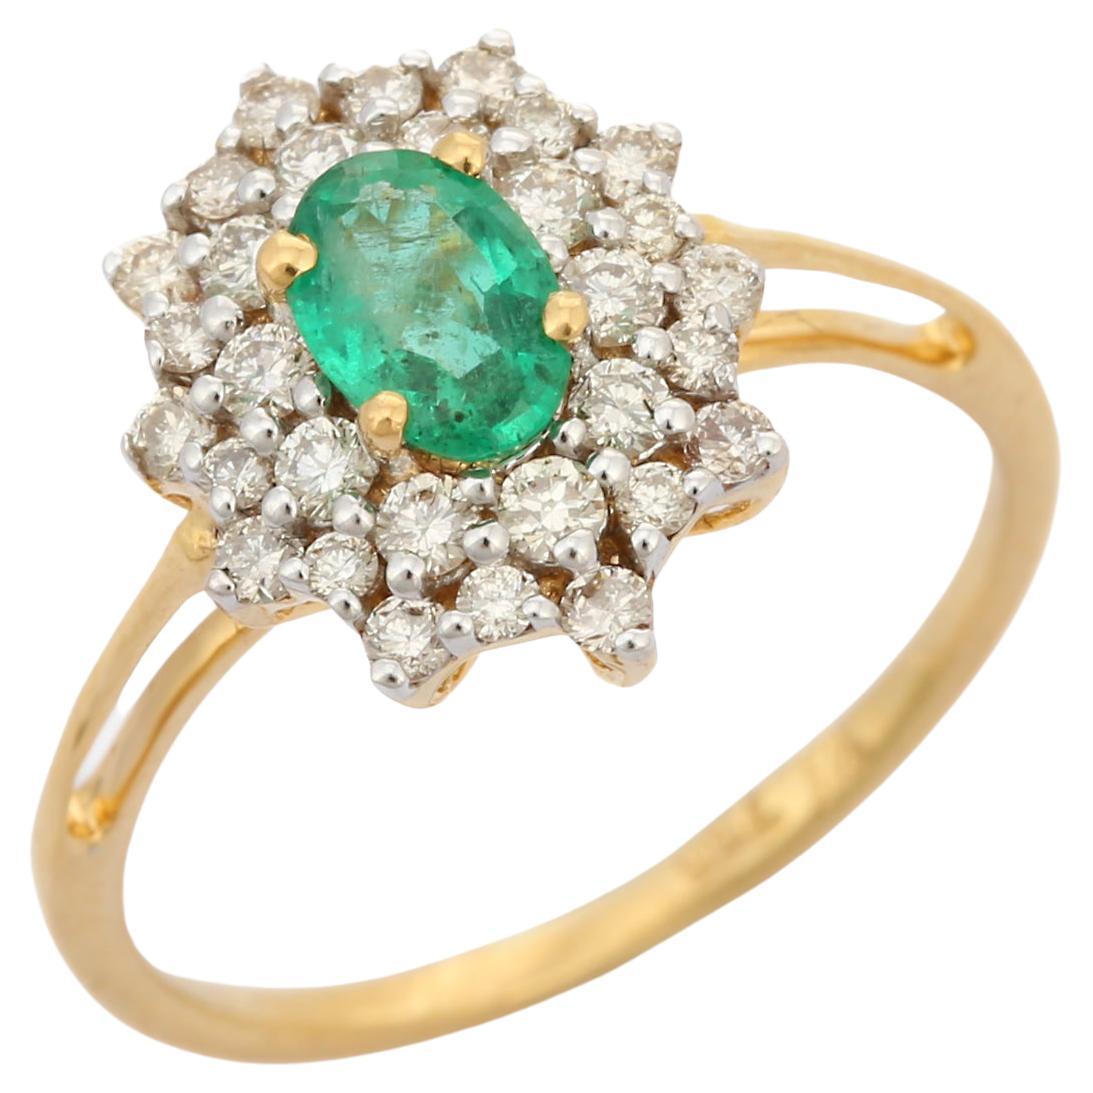 For Sale:  Oval Cut Brilliant Halo Diamond Emerald Wedding Ring in 18K Solid Yellow Gold